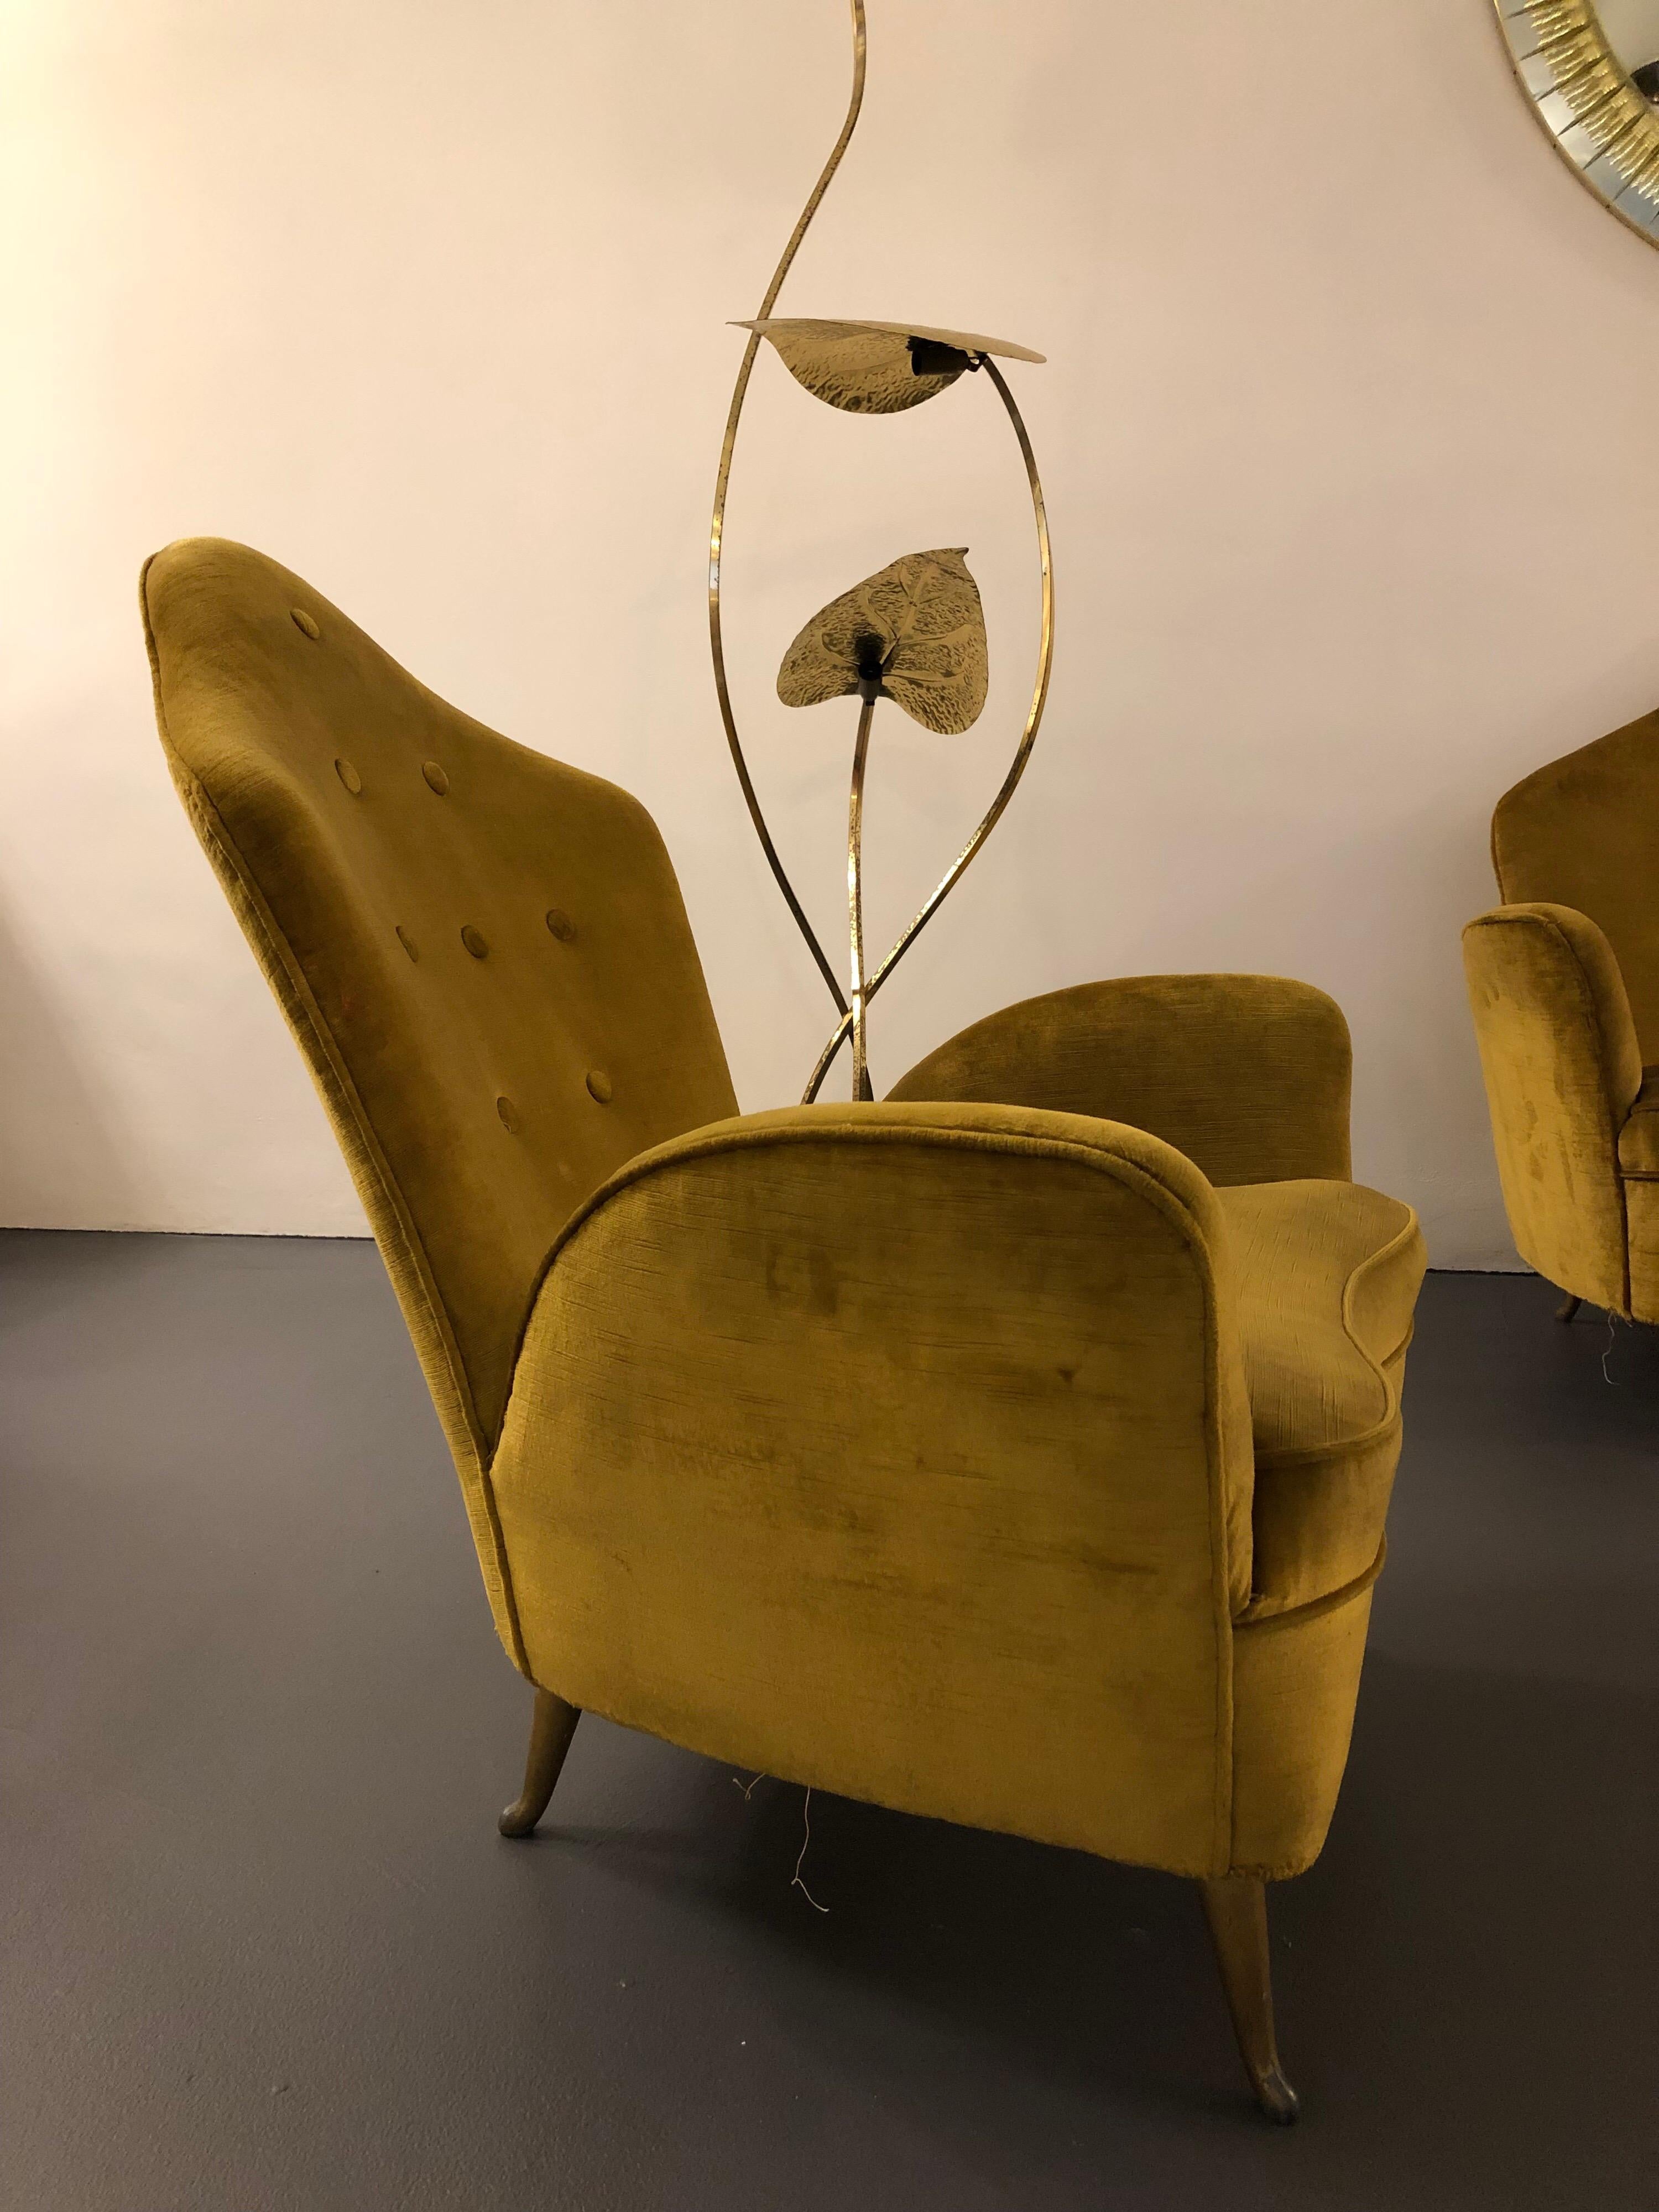 Set of Italian Midcentury Sofa and Armchairs by Isa Bergamo, 1950s For Sale 4